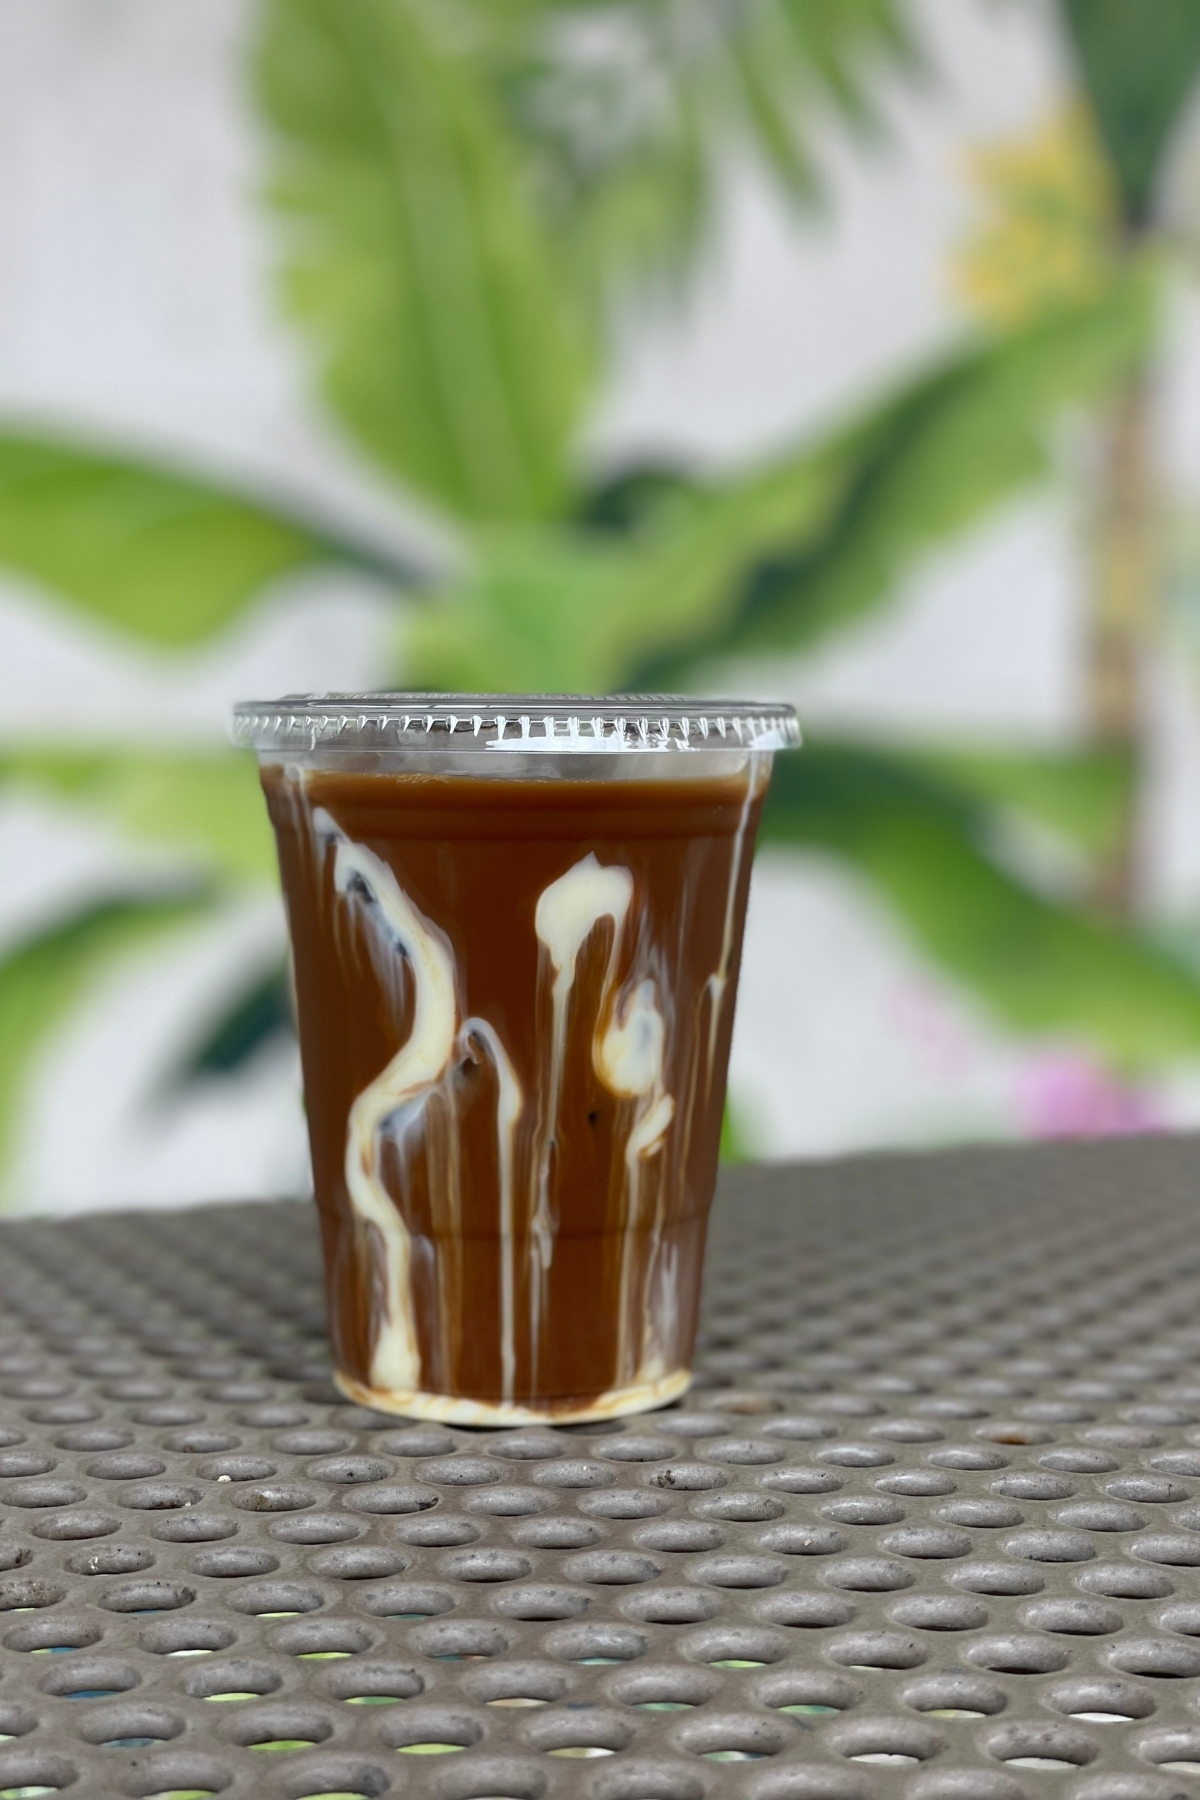 A cup of Vietnamese coffee called cafe sua da made with coconut cream and sweetened condensed milk, which is placed on a outdoor patio table.